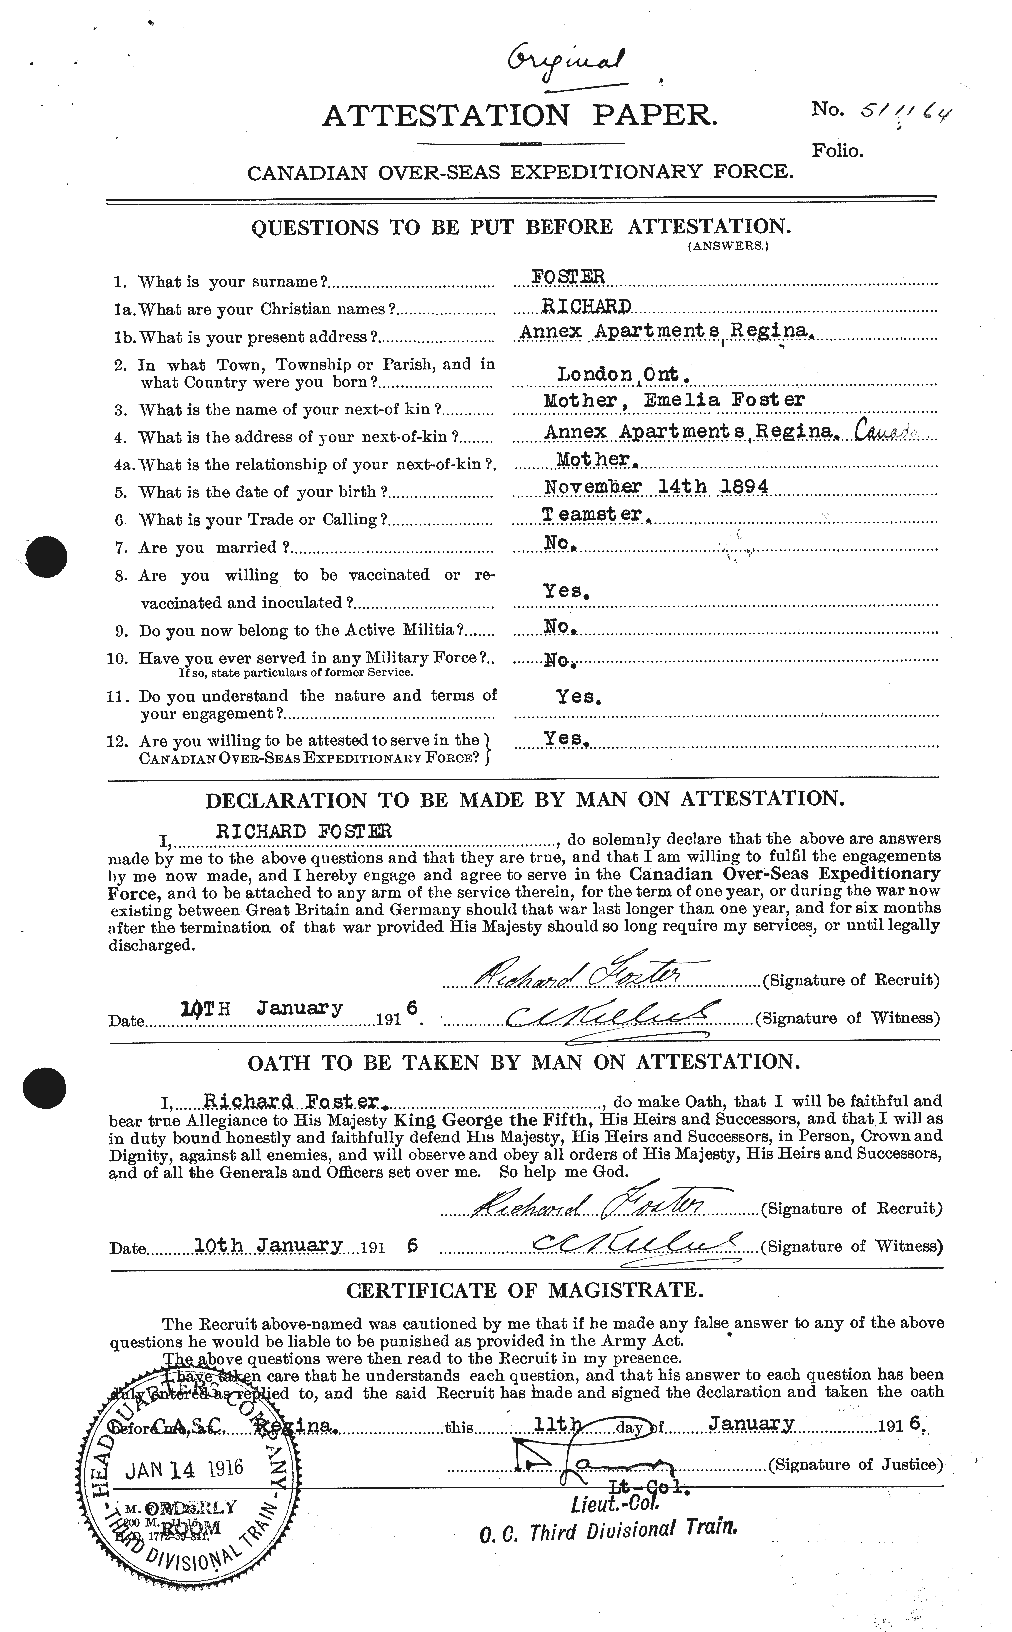 Personnel Records of the First World War - CEF 335160a